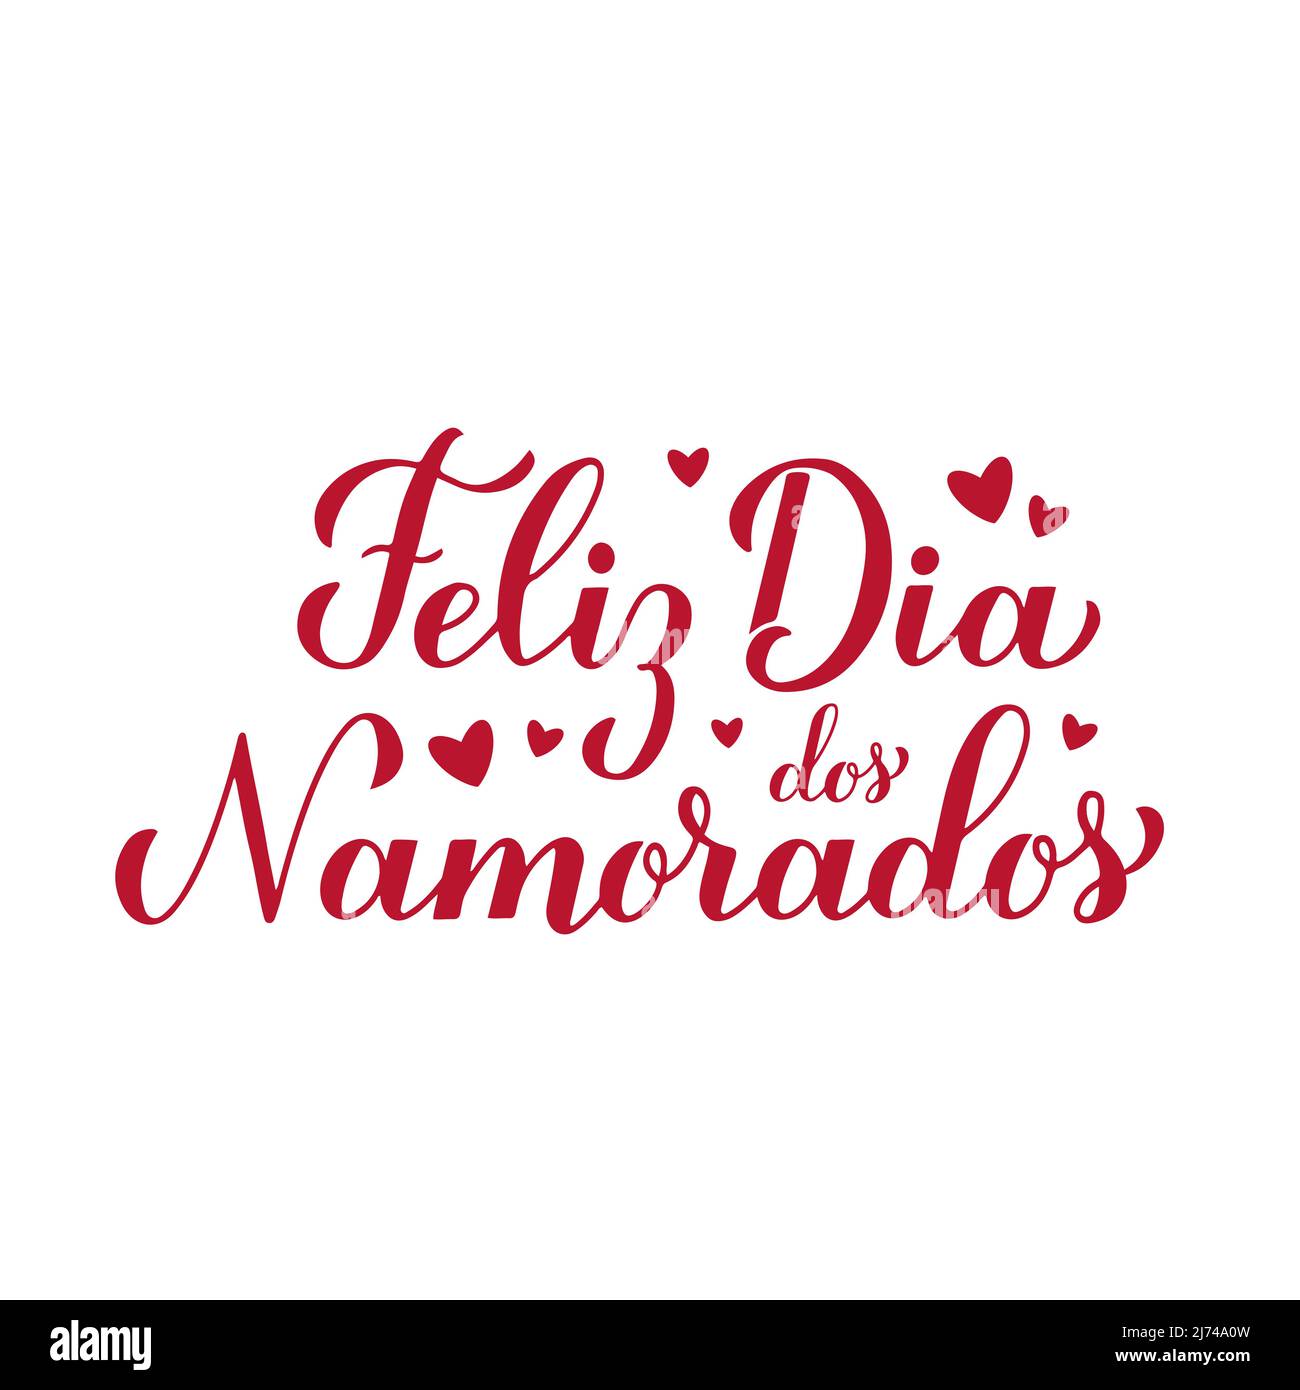 Dia Dos Namorados calligraphy hand lettering. Happy Valentines Day